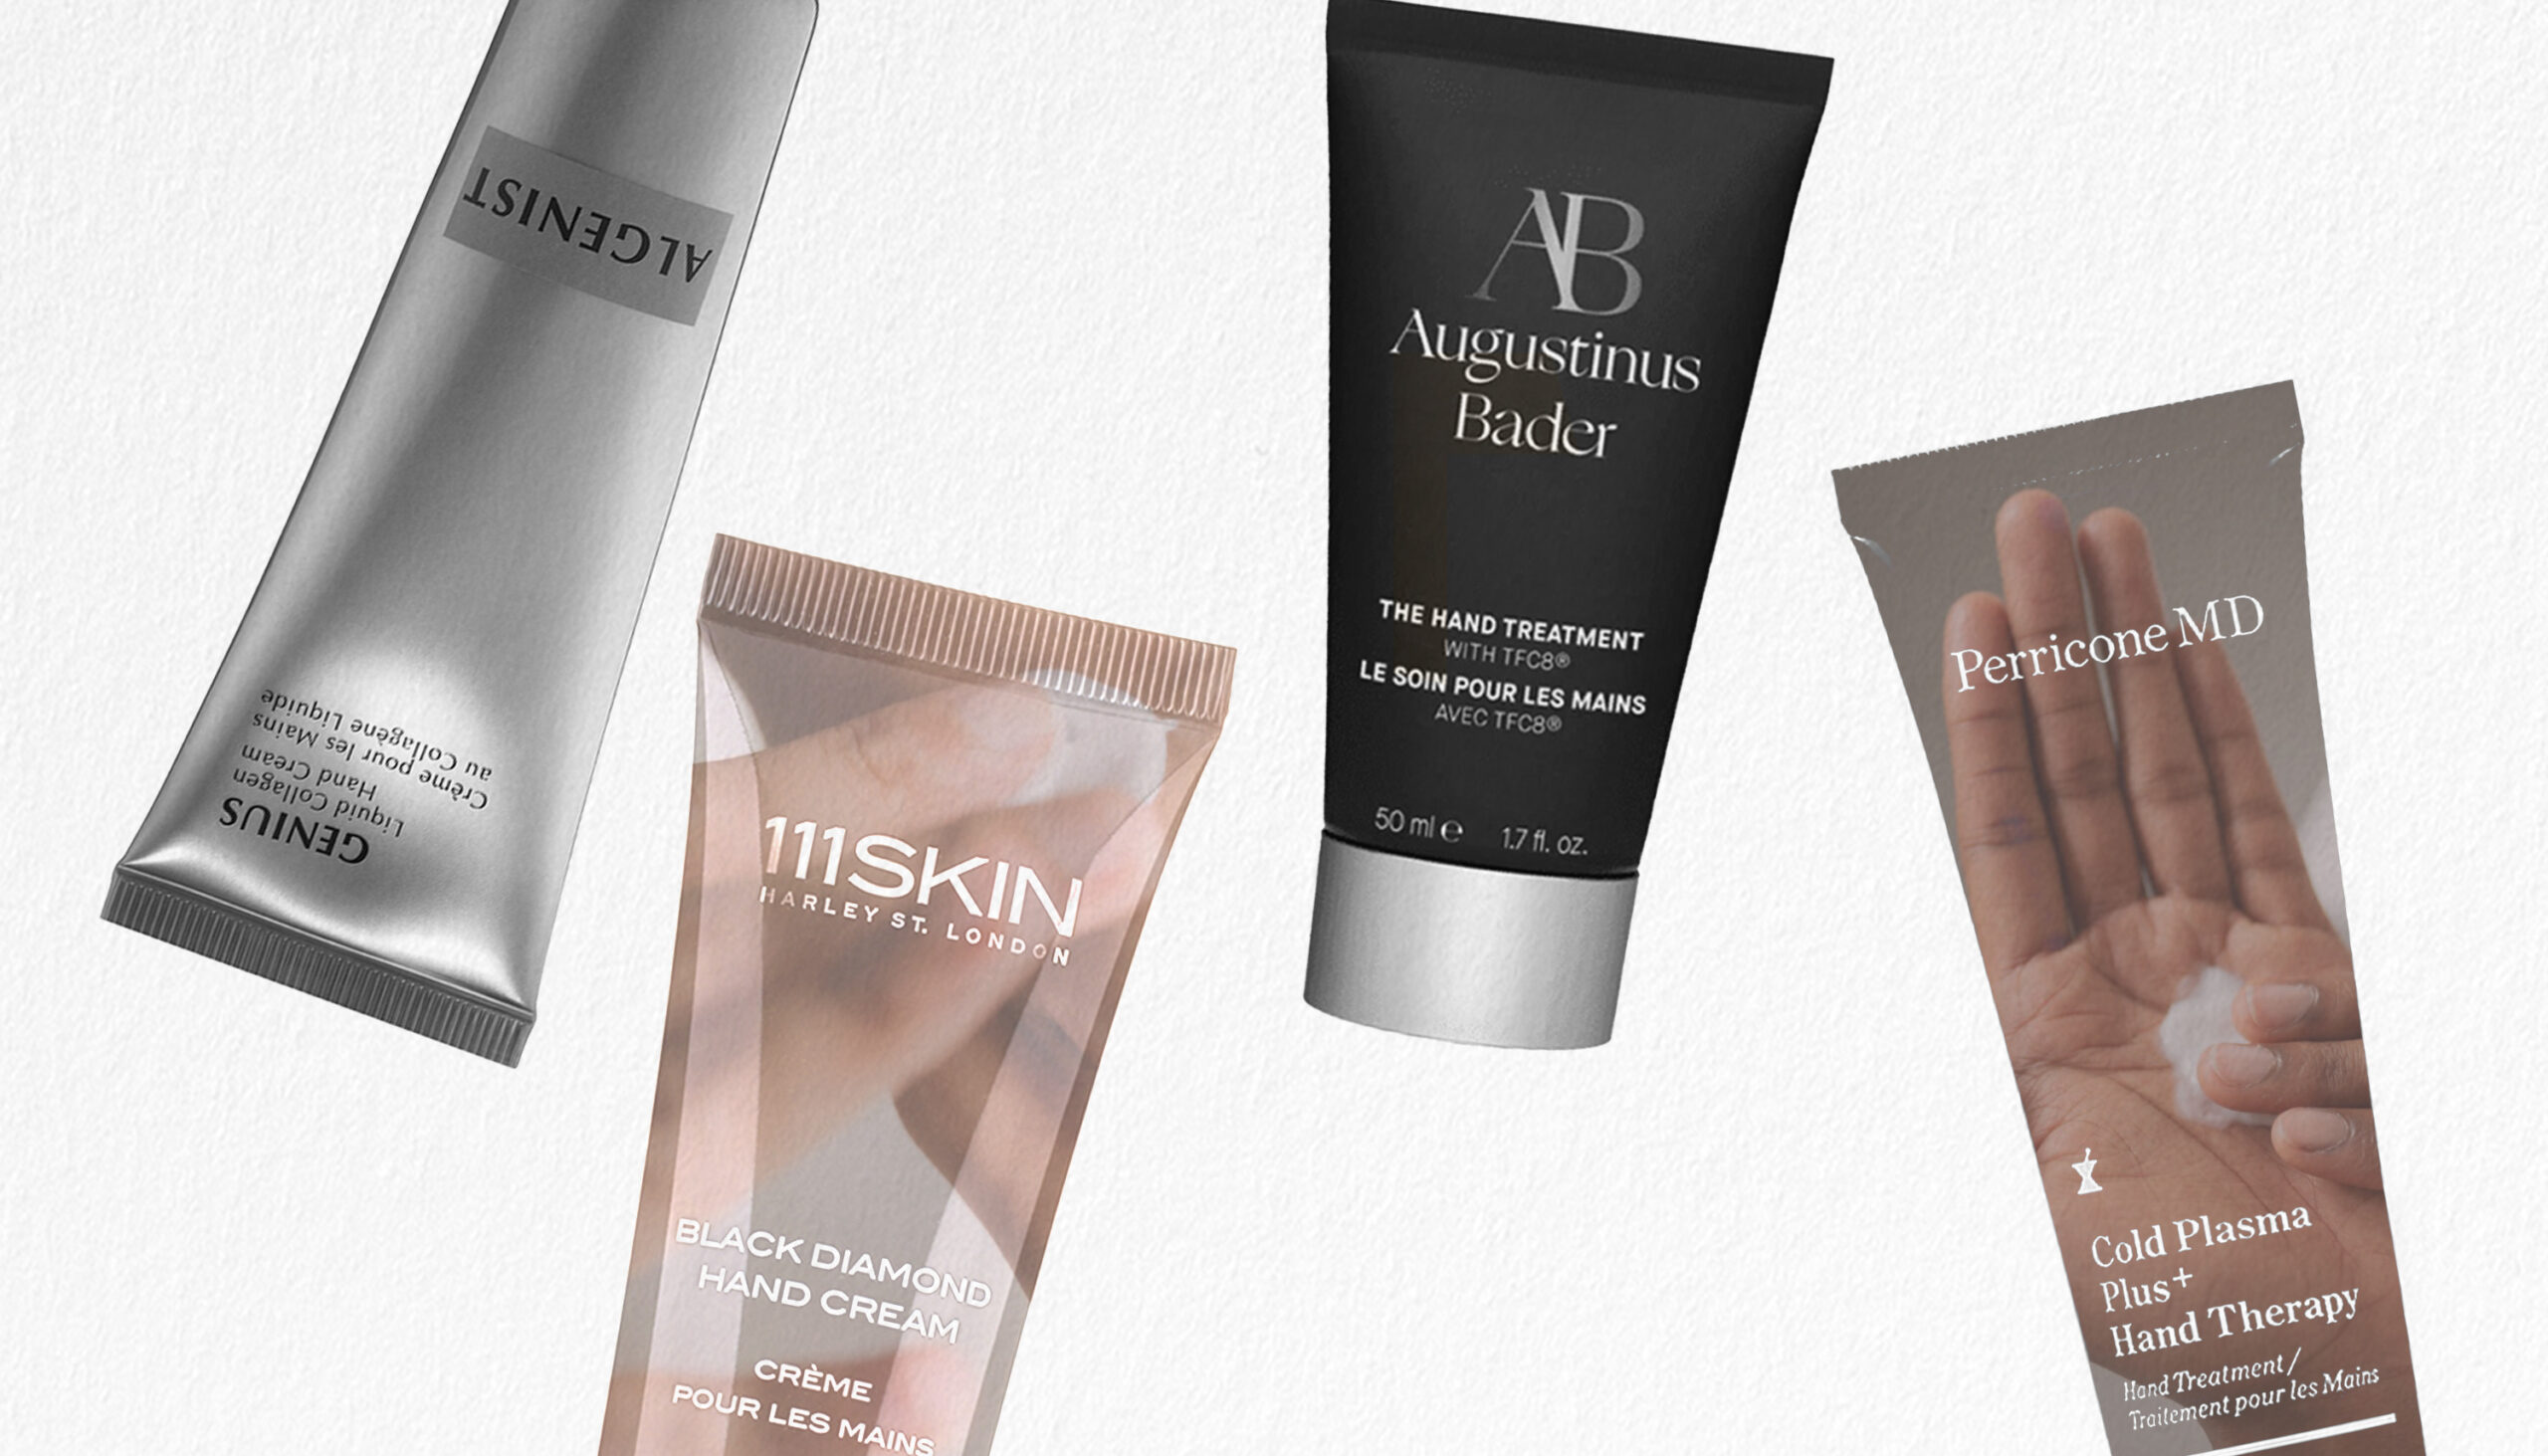 The Best Products to Turn the Clock Back on Aging
Hands